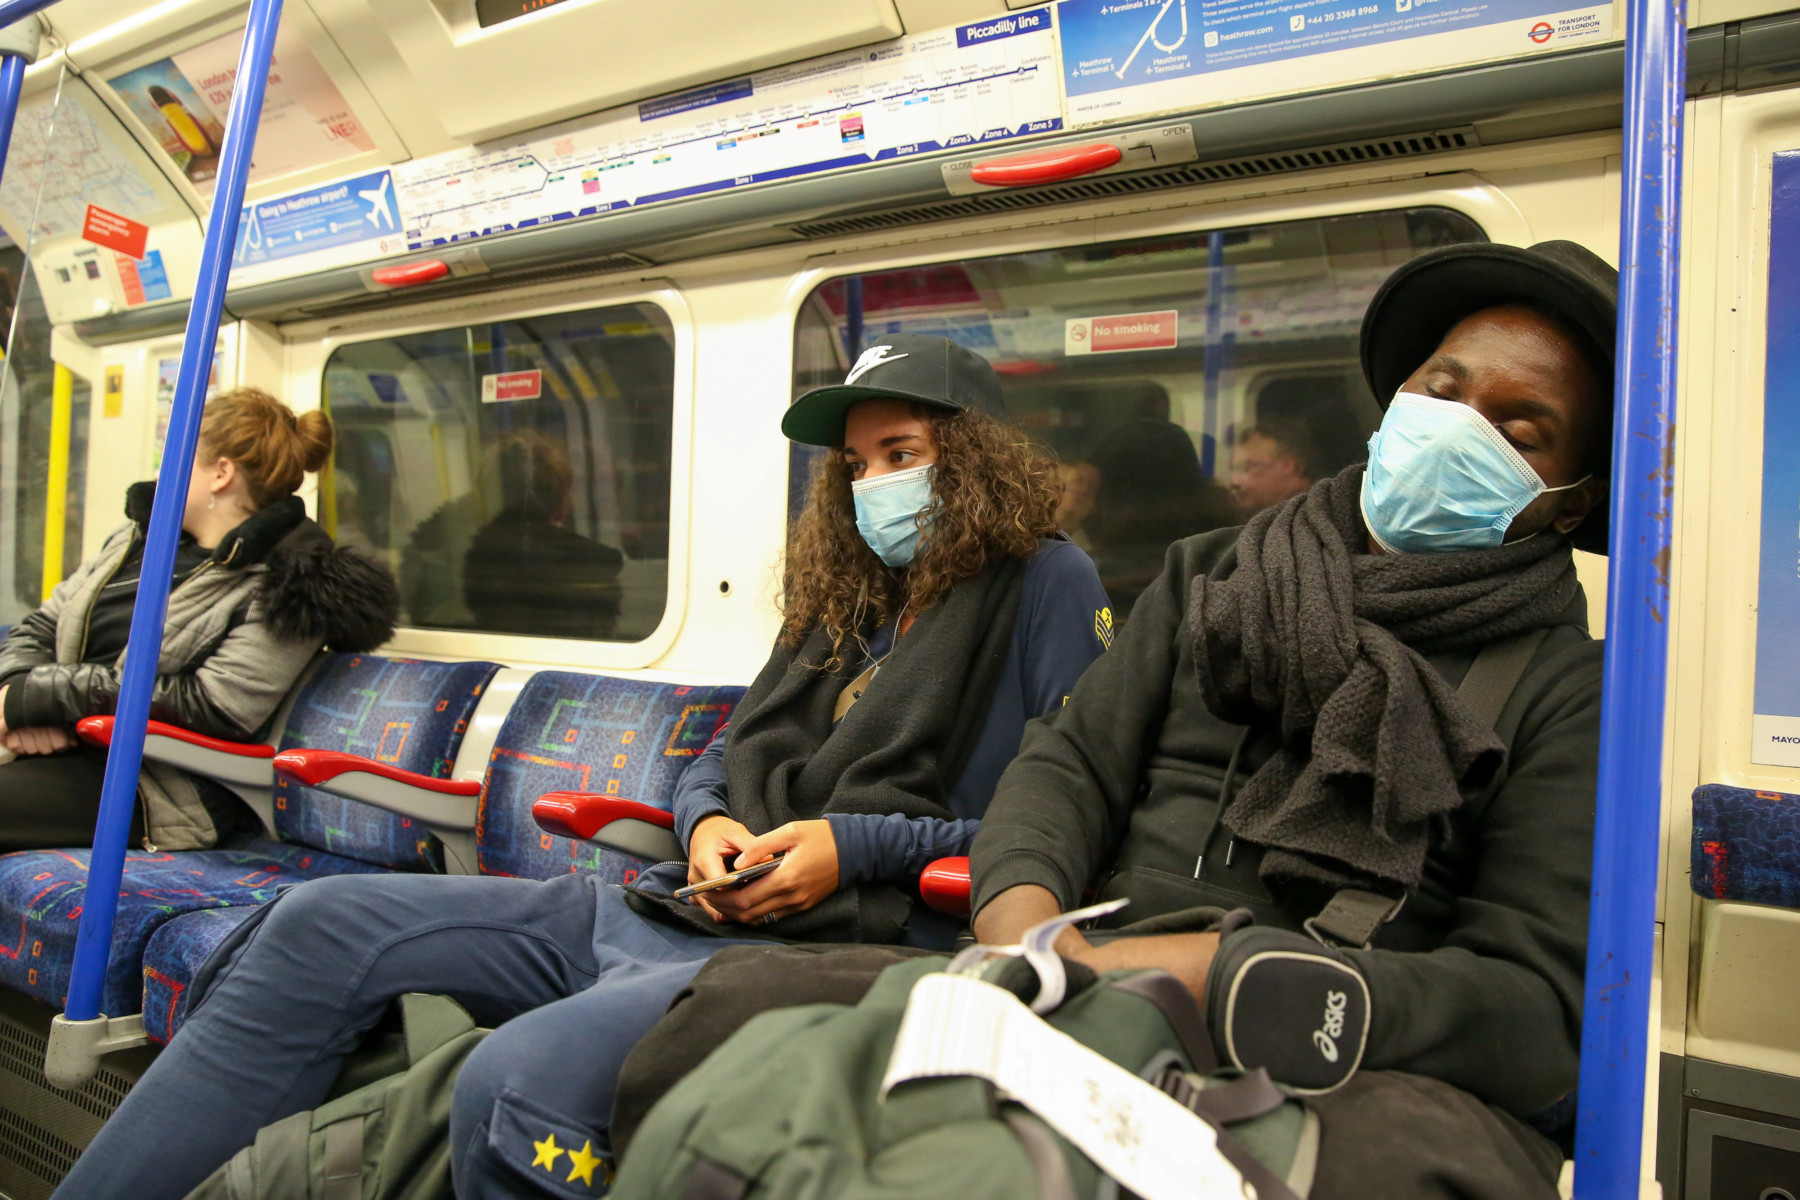 People will be advised to cover their face when at work, in shops or on public transport